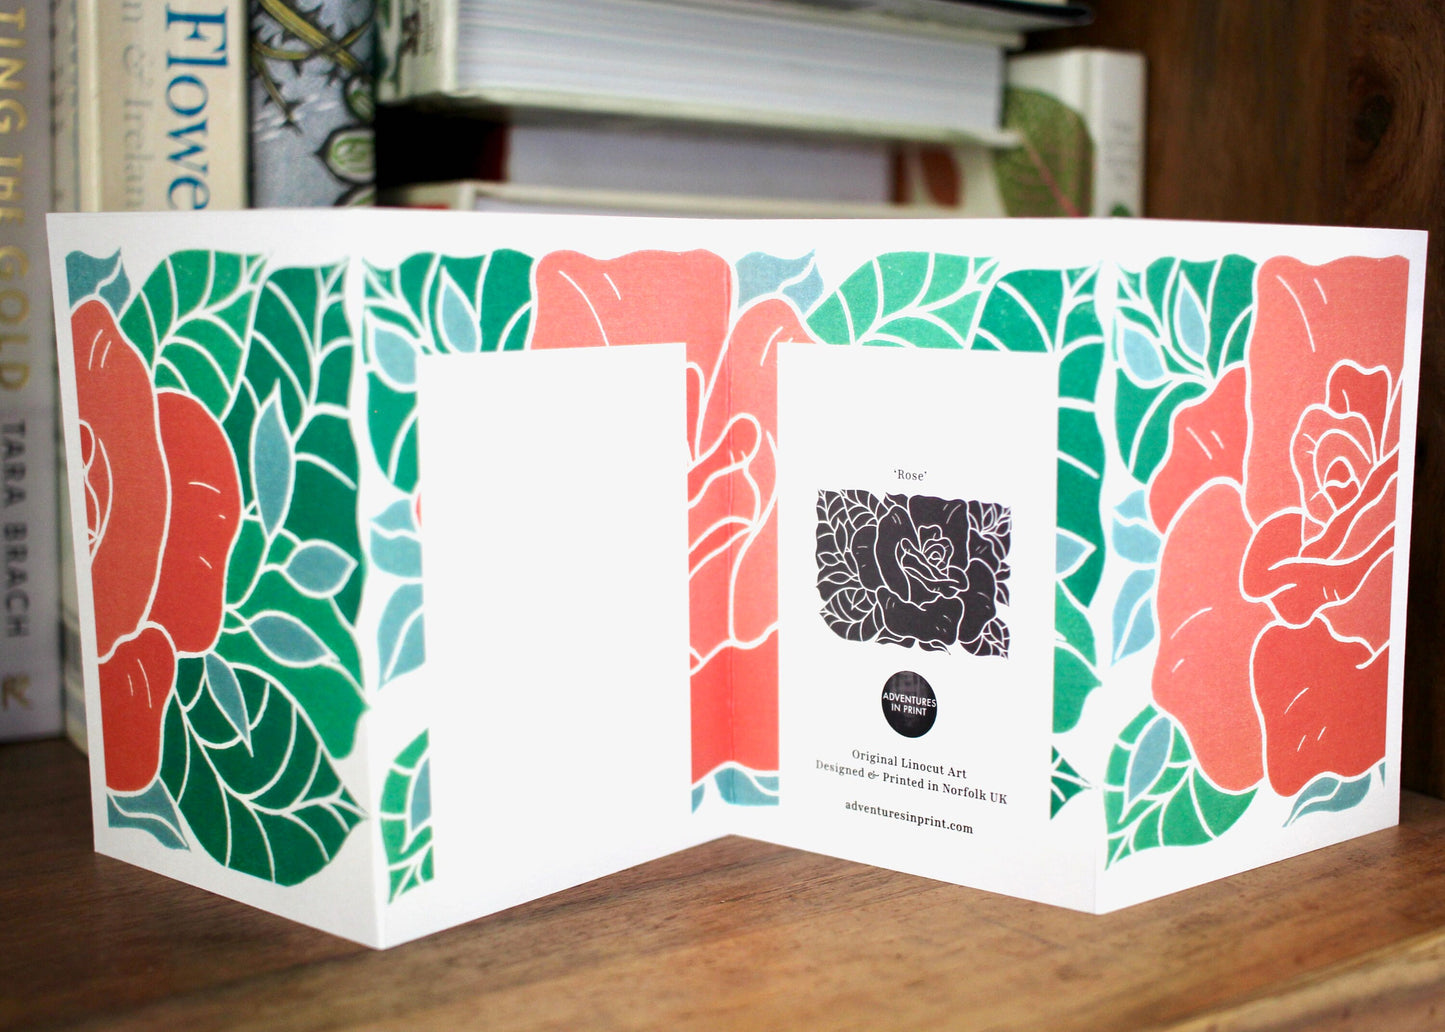 Our double sided concertina artwork cards come feature space for you to write your own message